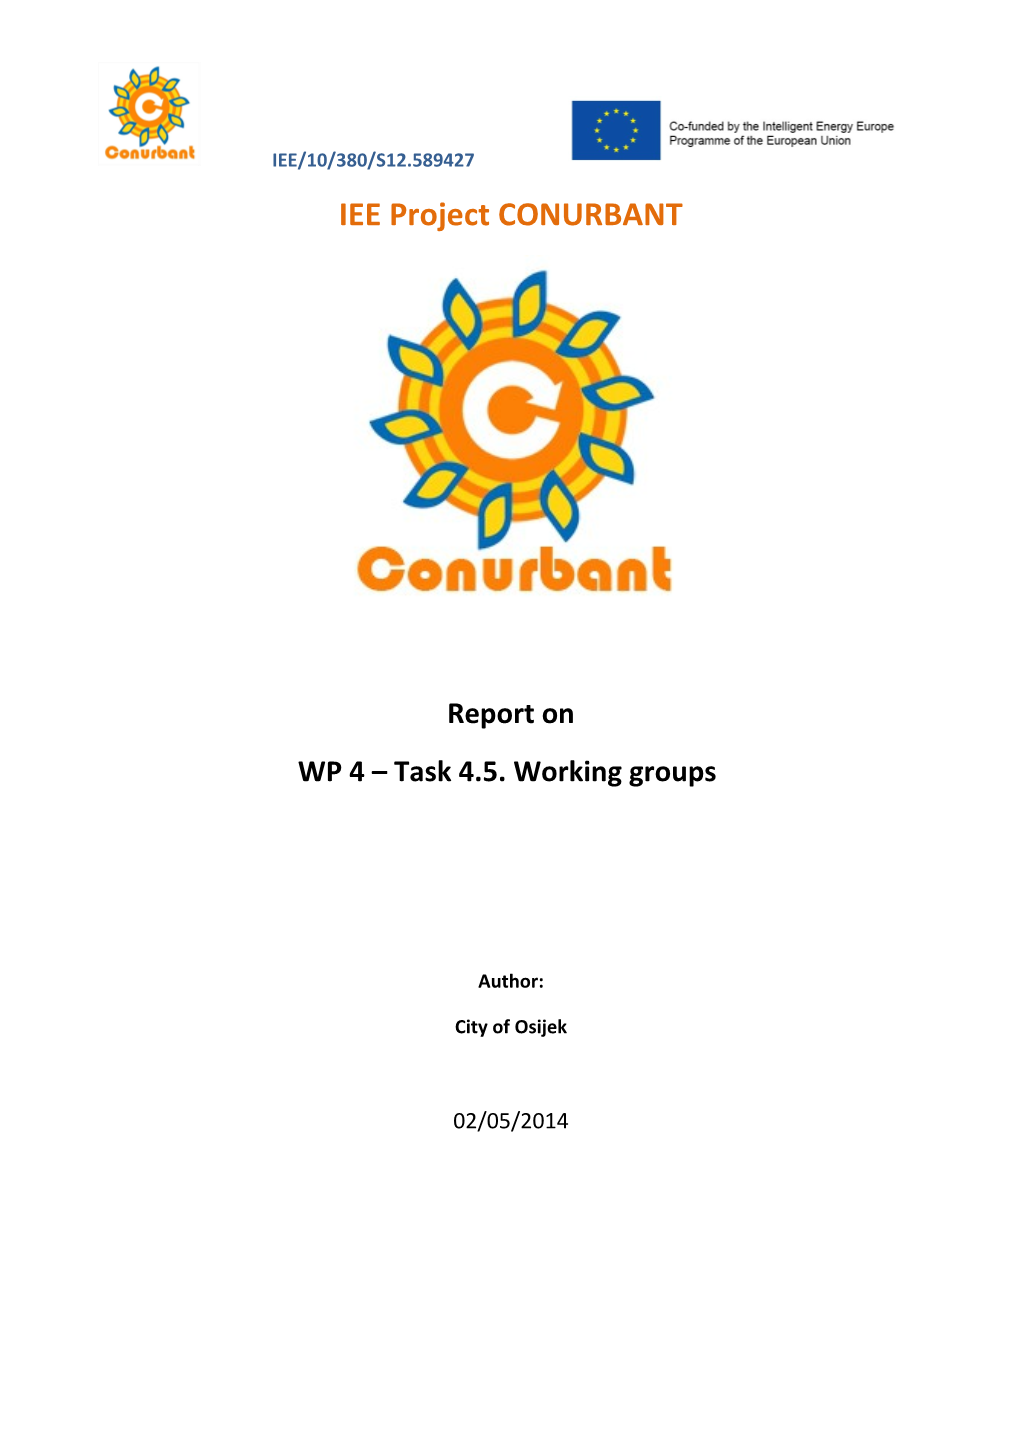 IEE Project CONURBANT